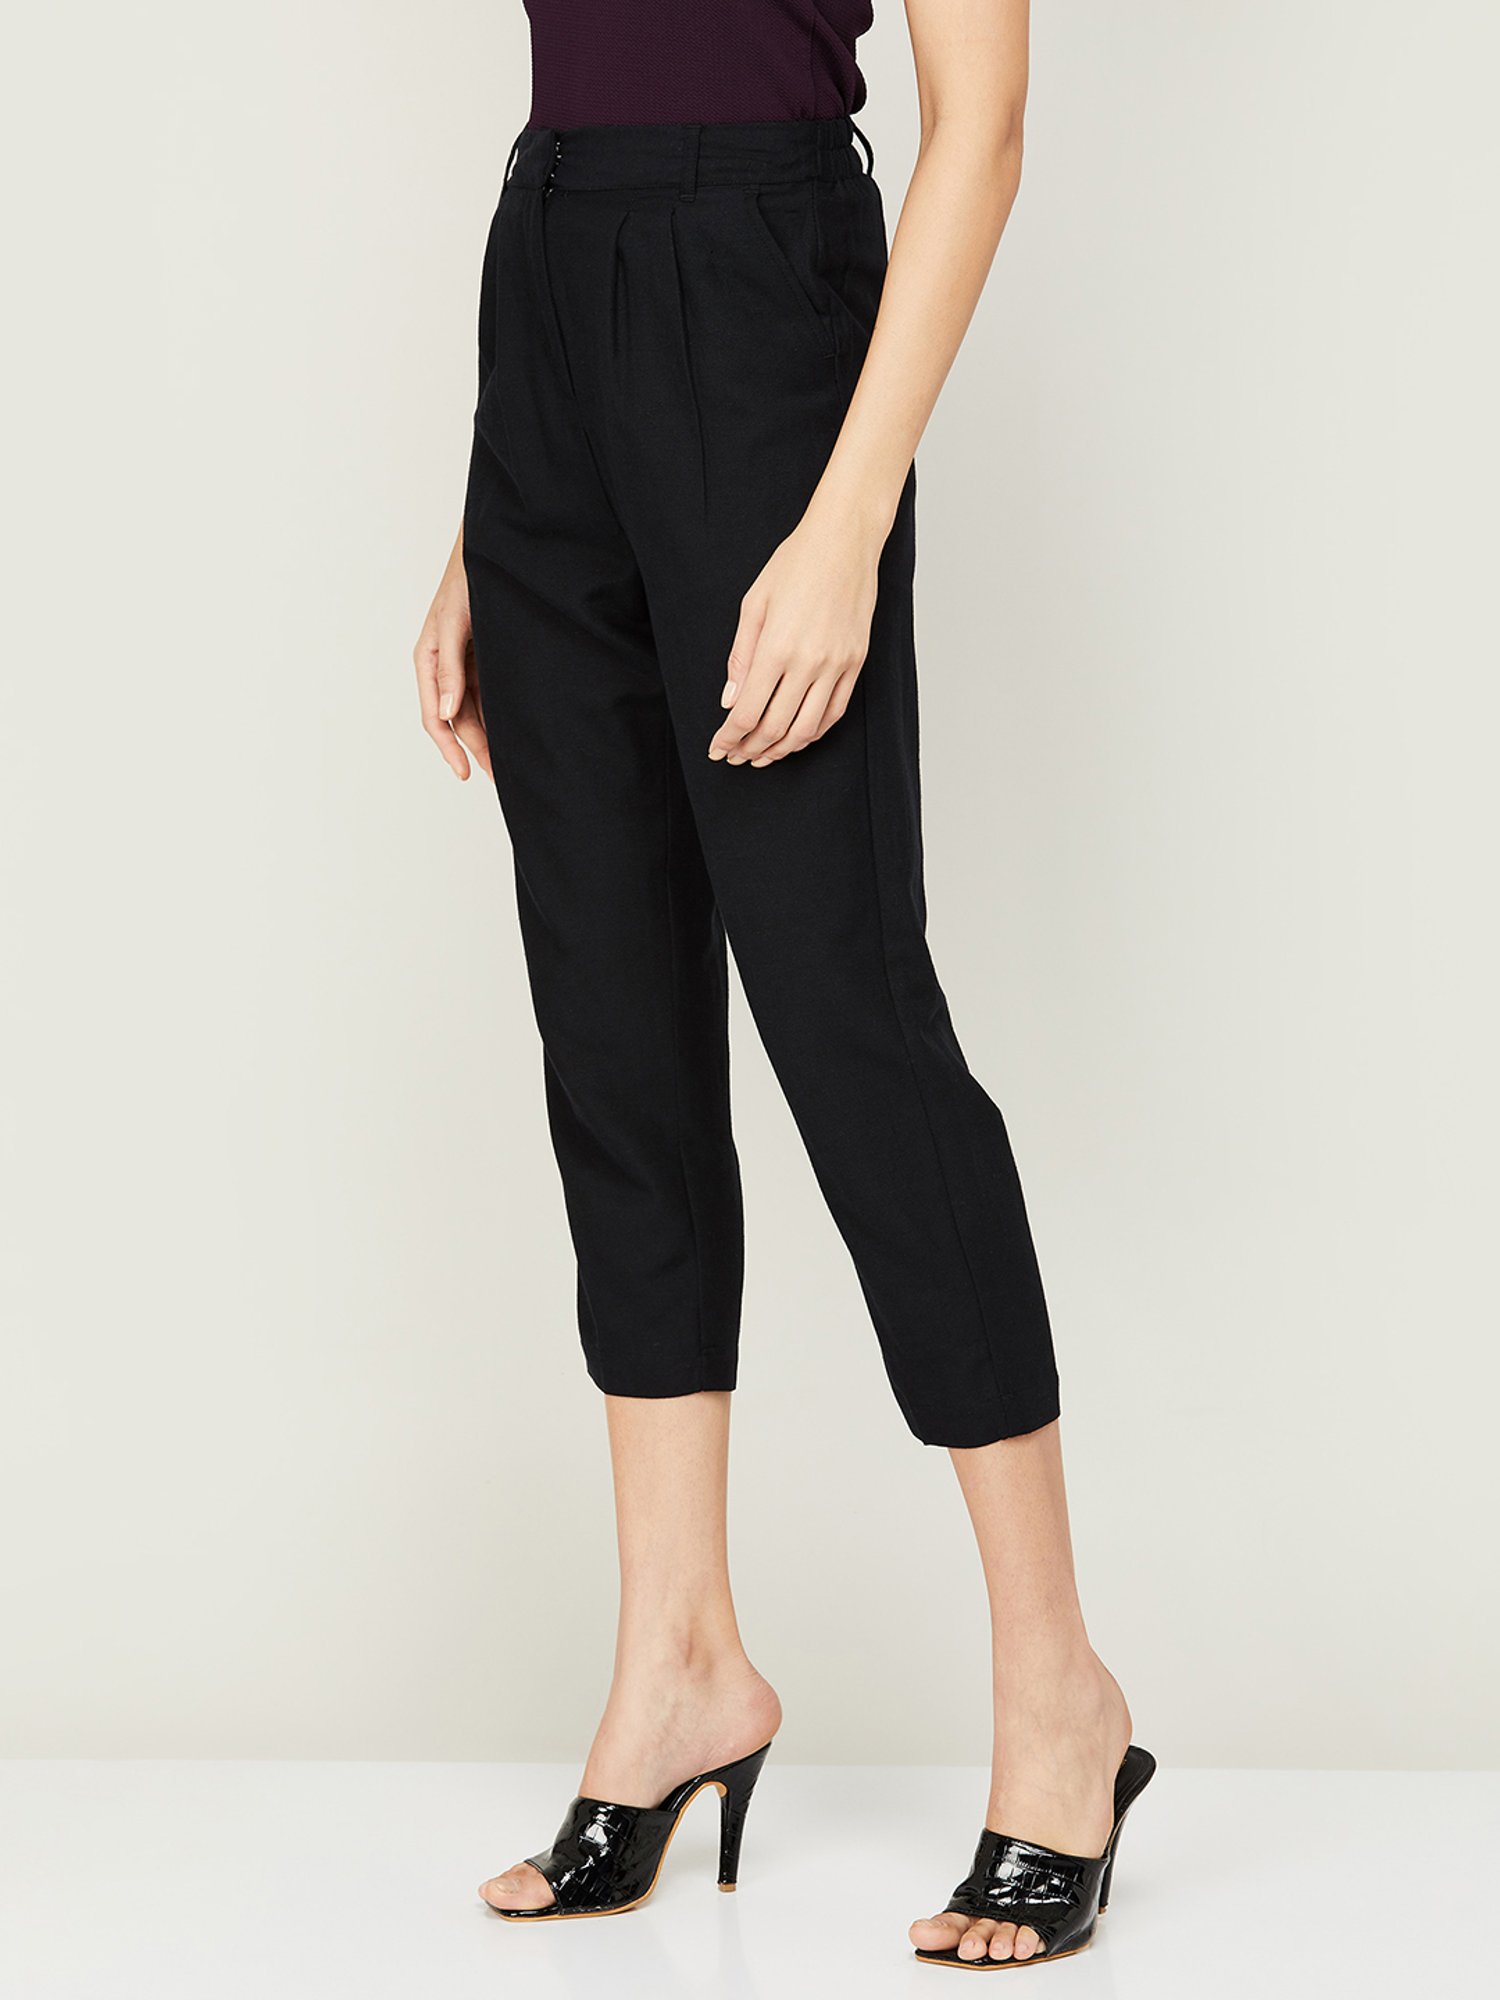 Buy Green High Rise Cropped Pants For Women Online in India | VeroModa